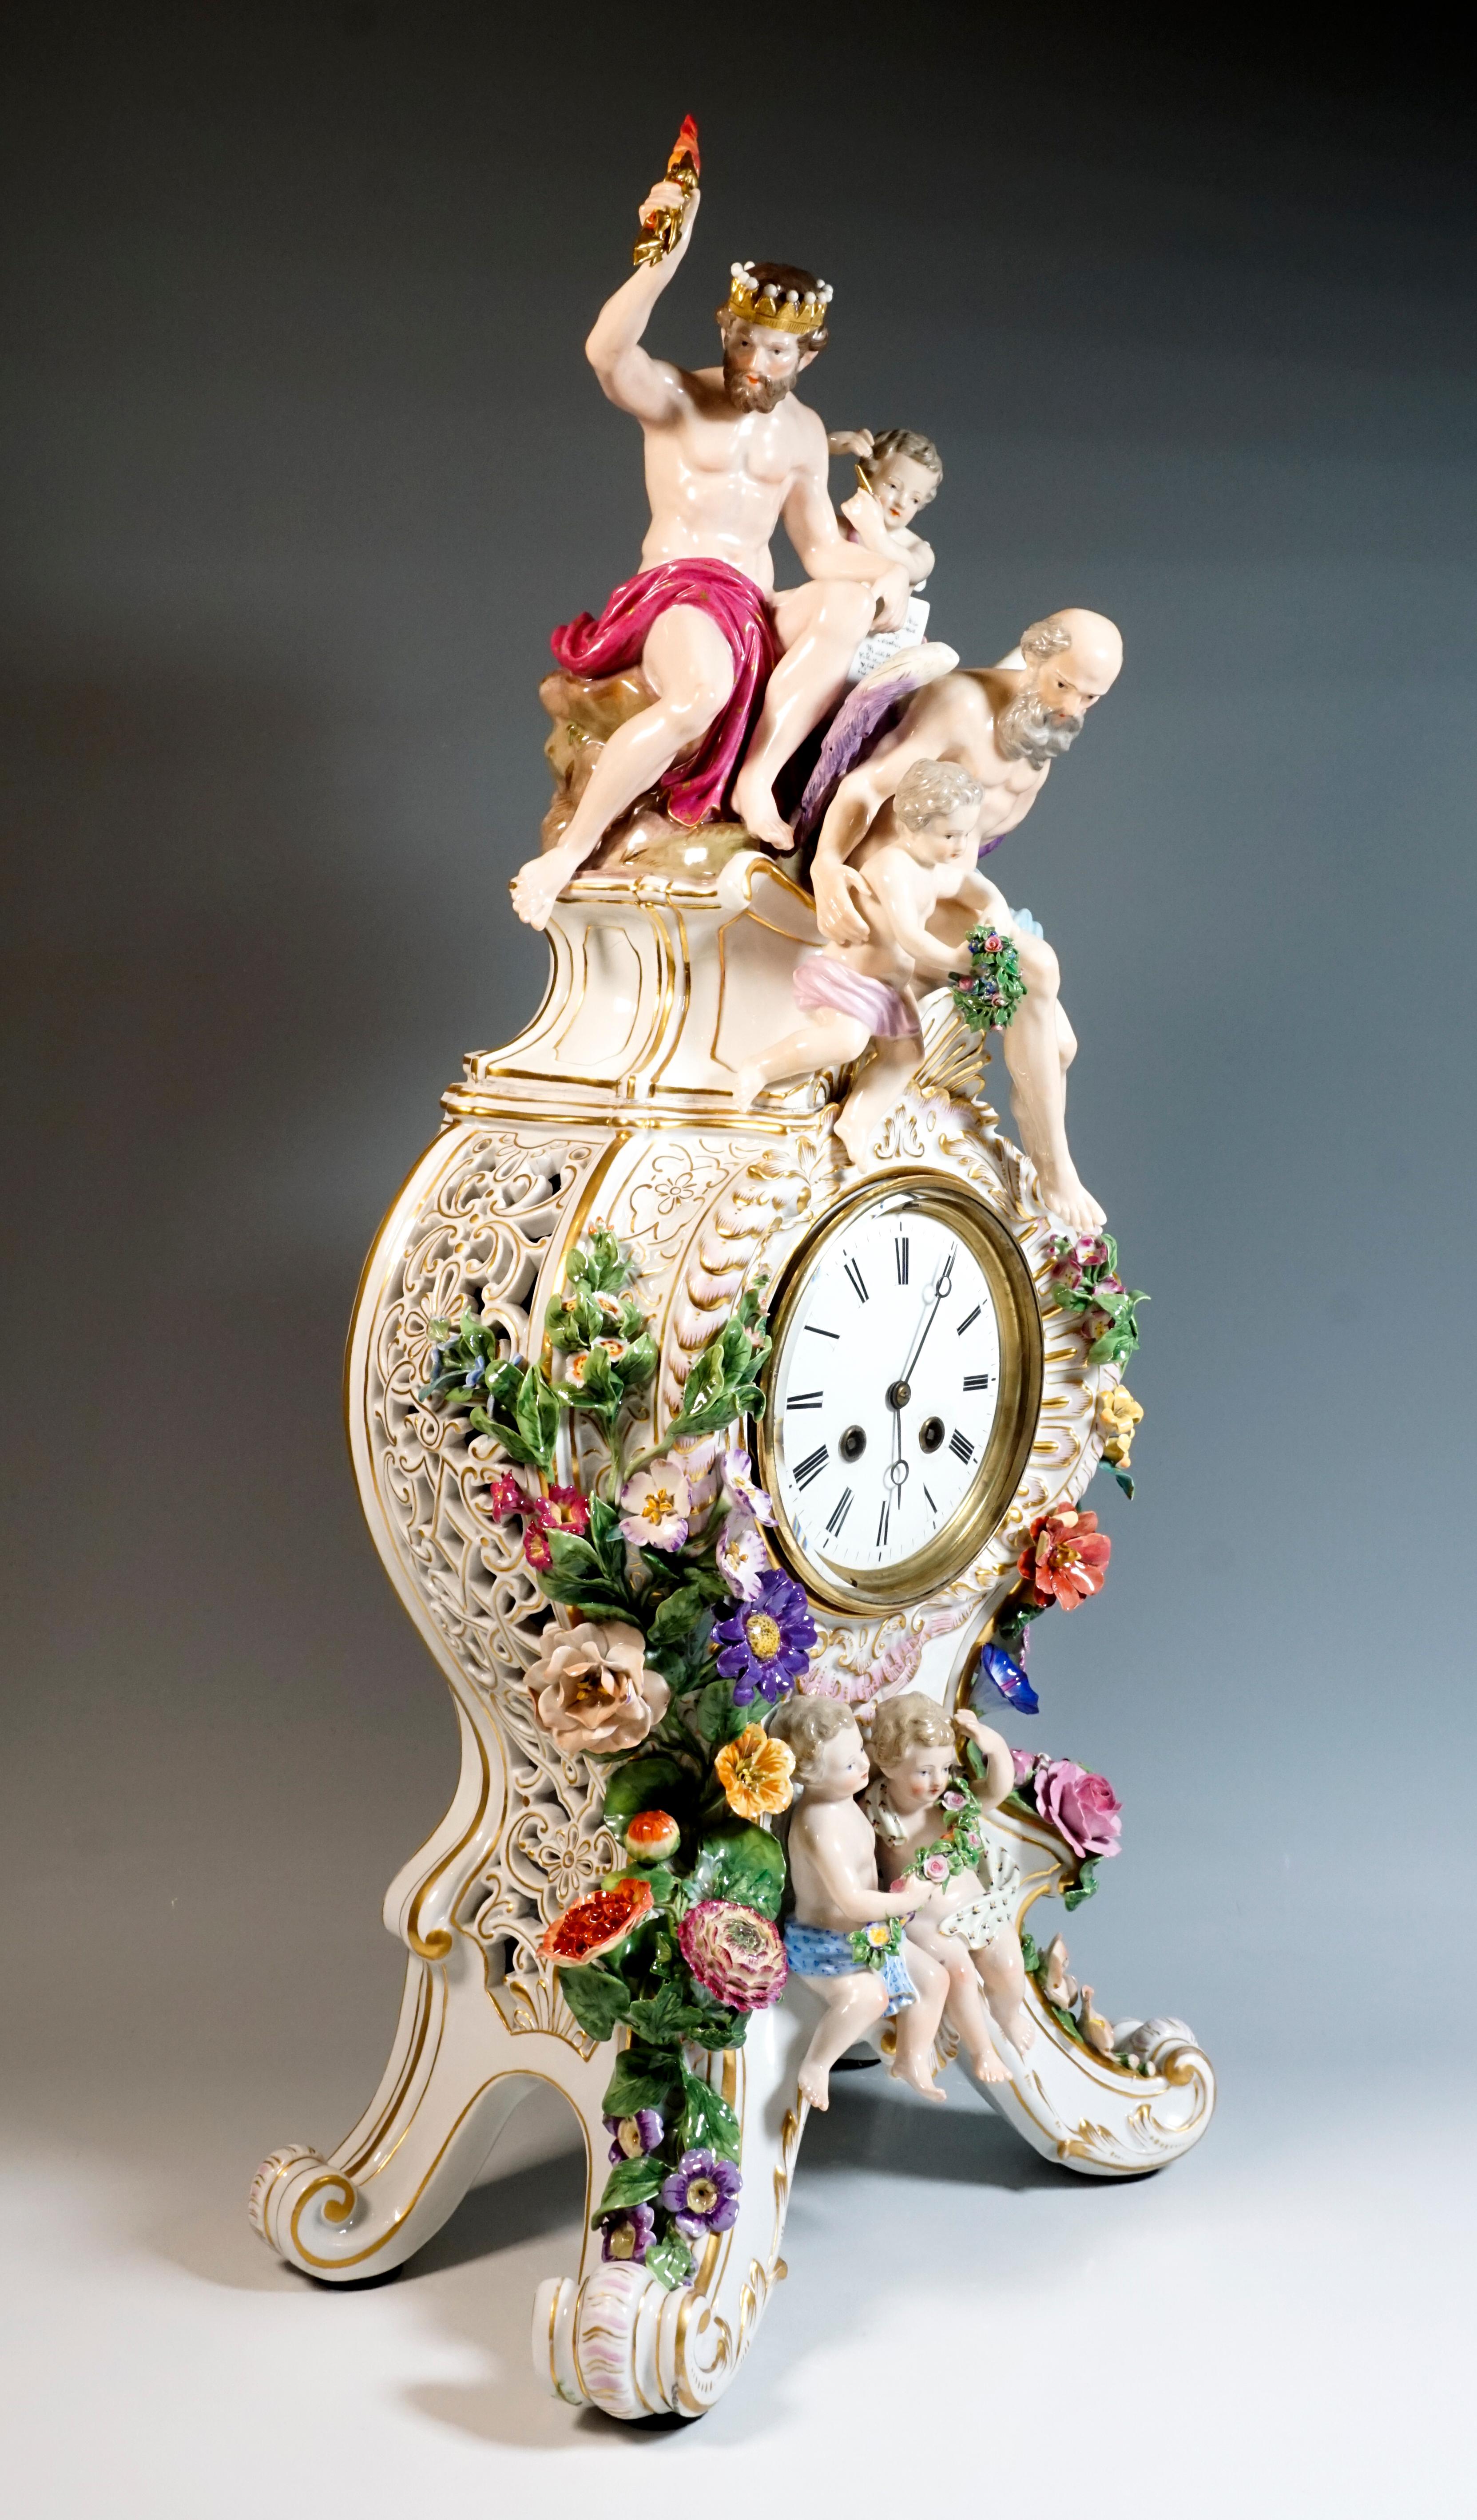 The clock was designed by Leuteritz in the Rococo style using old moulds: 
on four raised volute feet with gold rocaille ornamentation rises the clock case, open at the side by a volute and flower breakthrough work, richly decorated with elaborate,